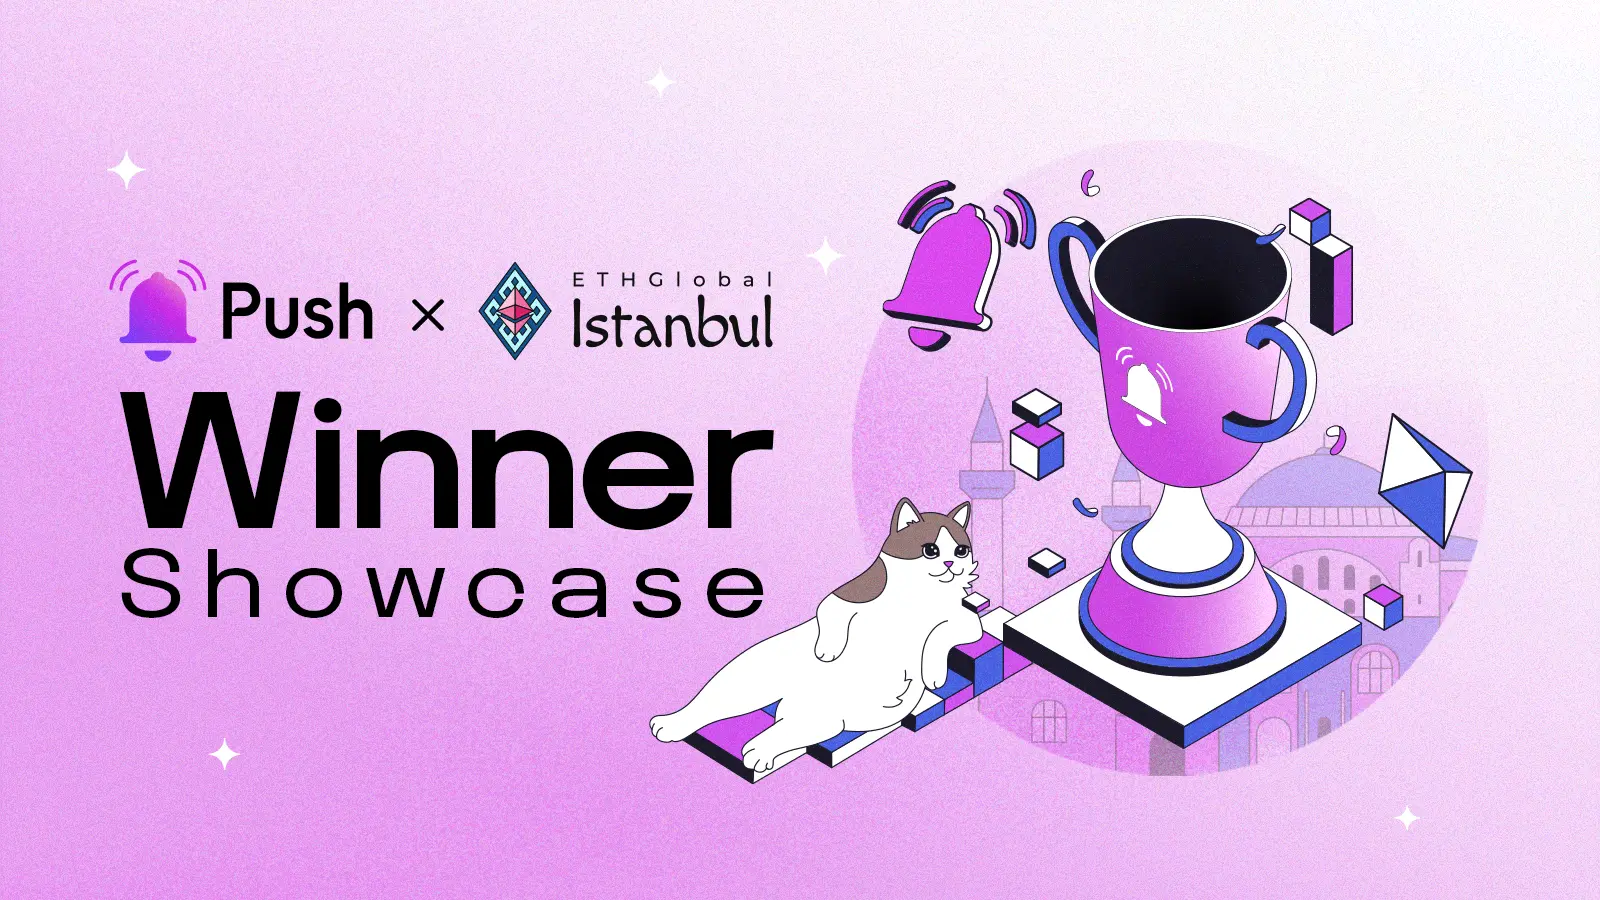 Cover Image of Push x ETHGlobal Istanbul - Enhance Your UX and Win $10k in Bounties